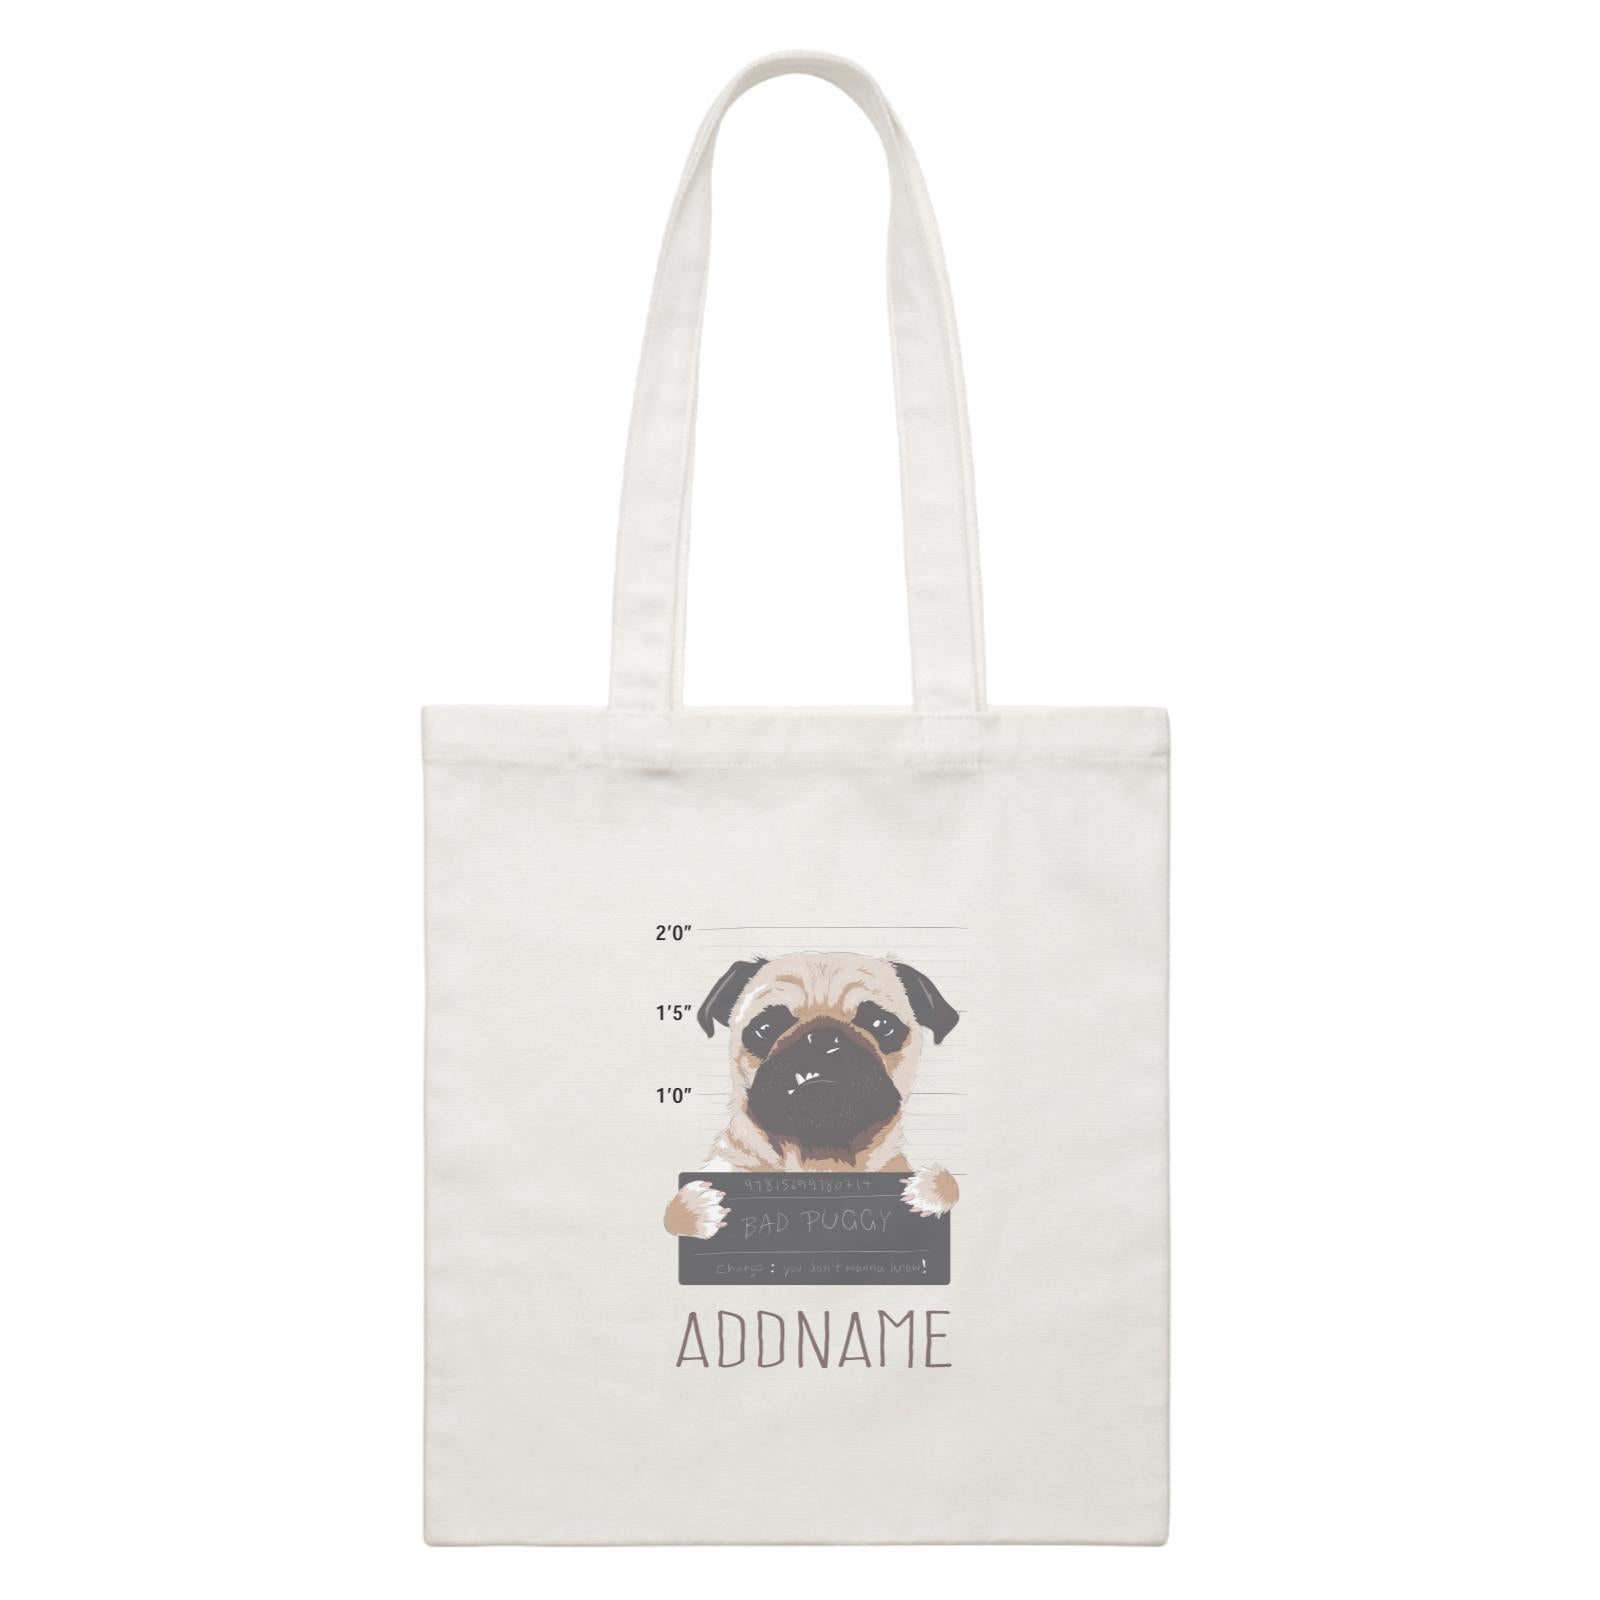 Funny Hand Drawn Animals Bad Puggy Charge You Don't Wanna Know With Addname White Canvas Bag